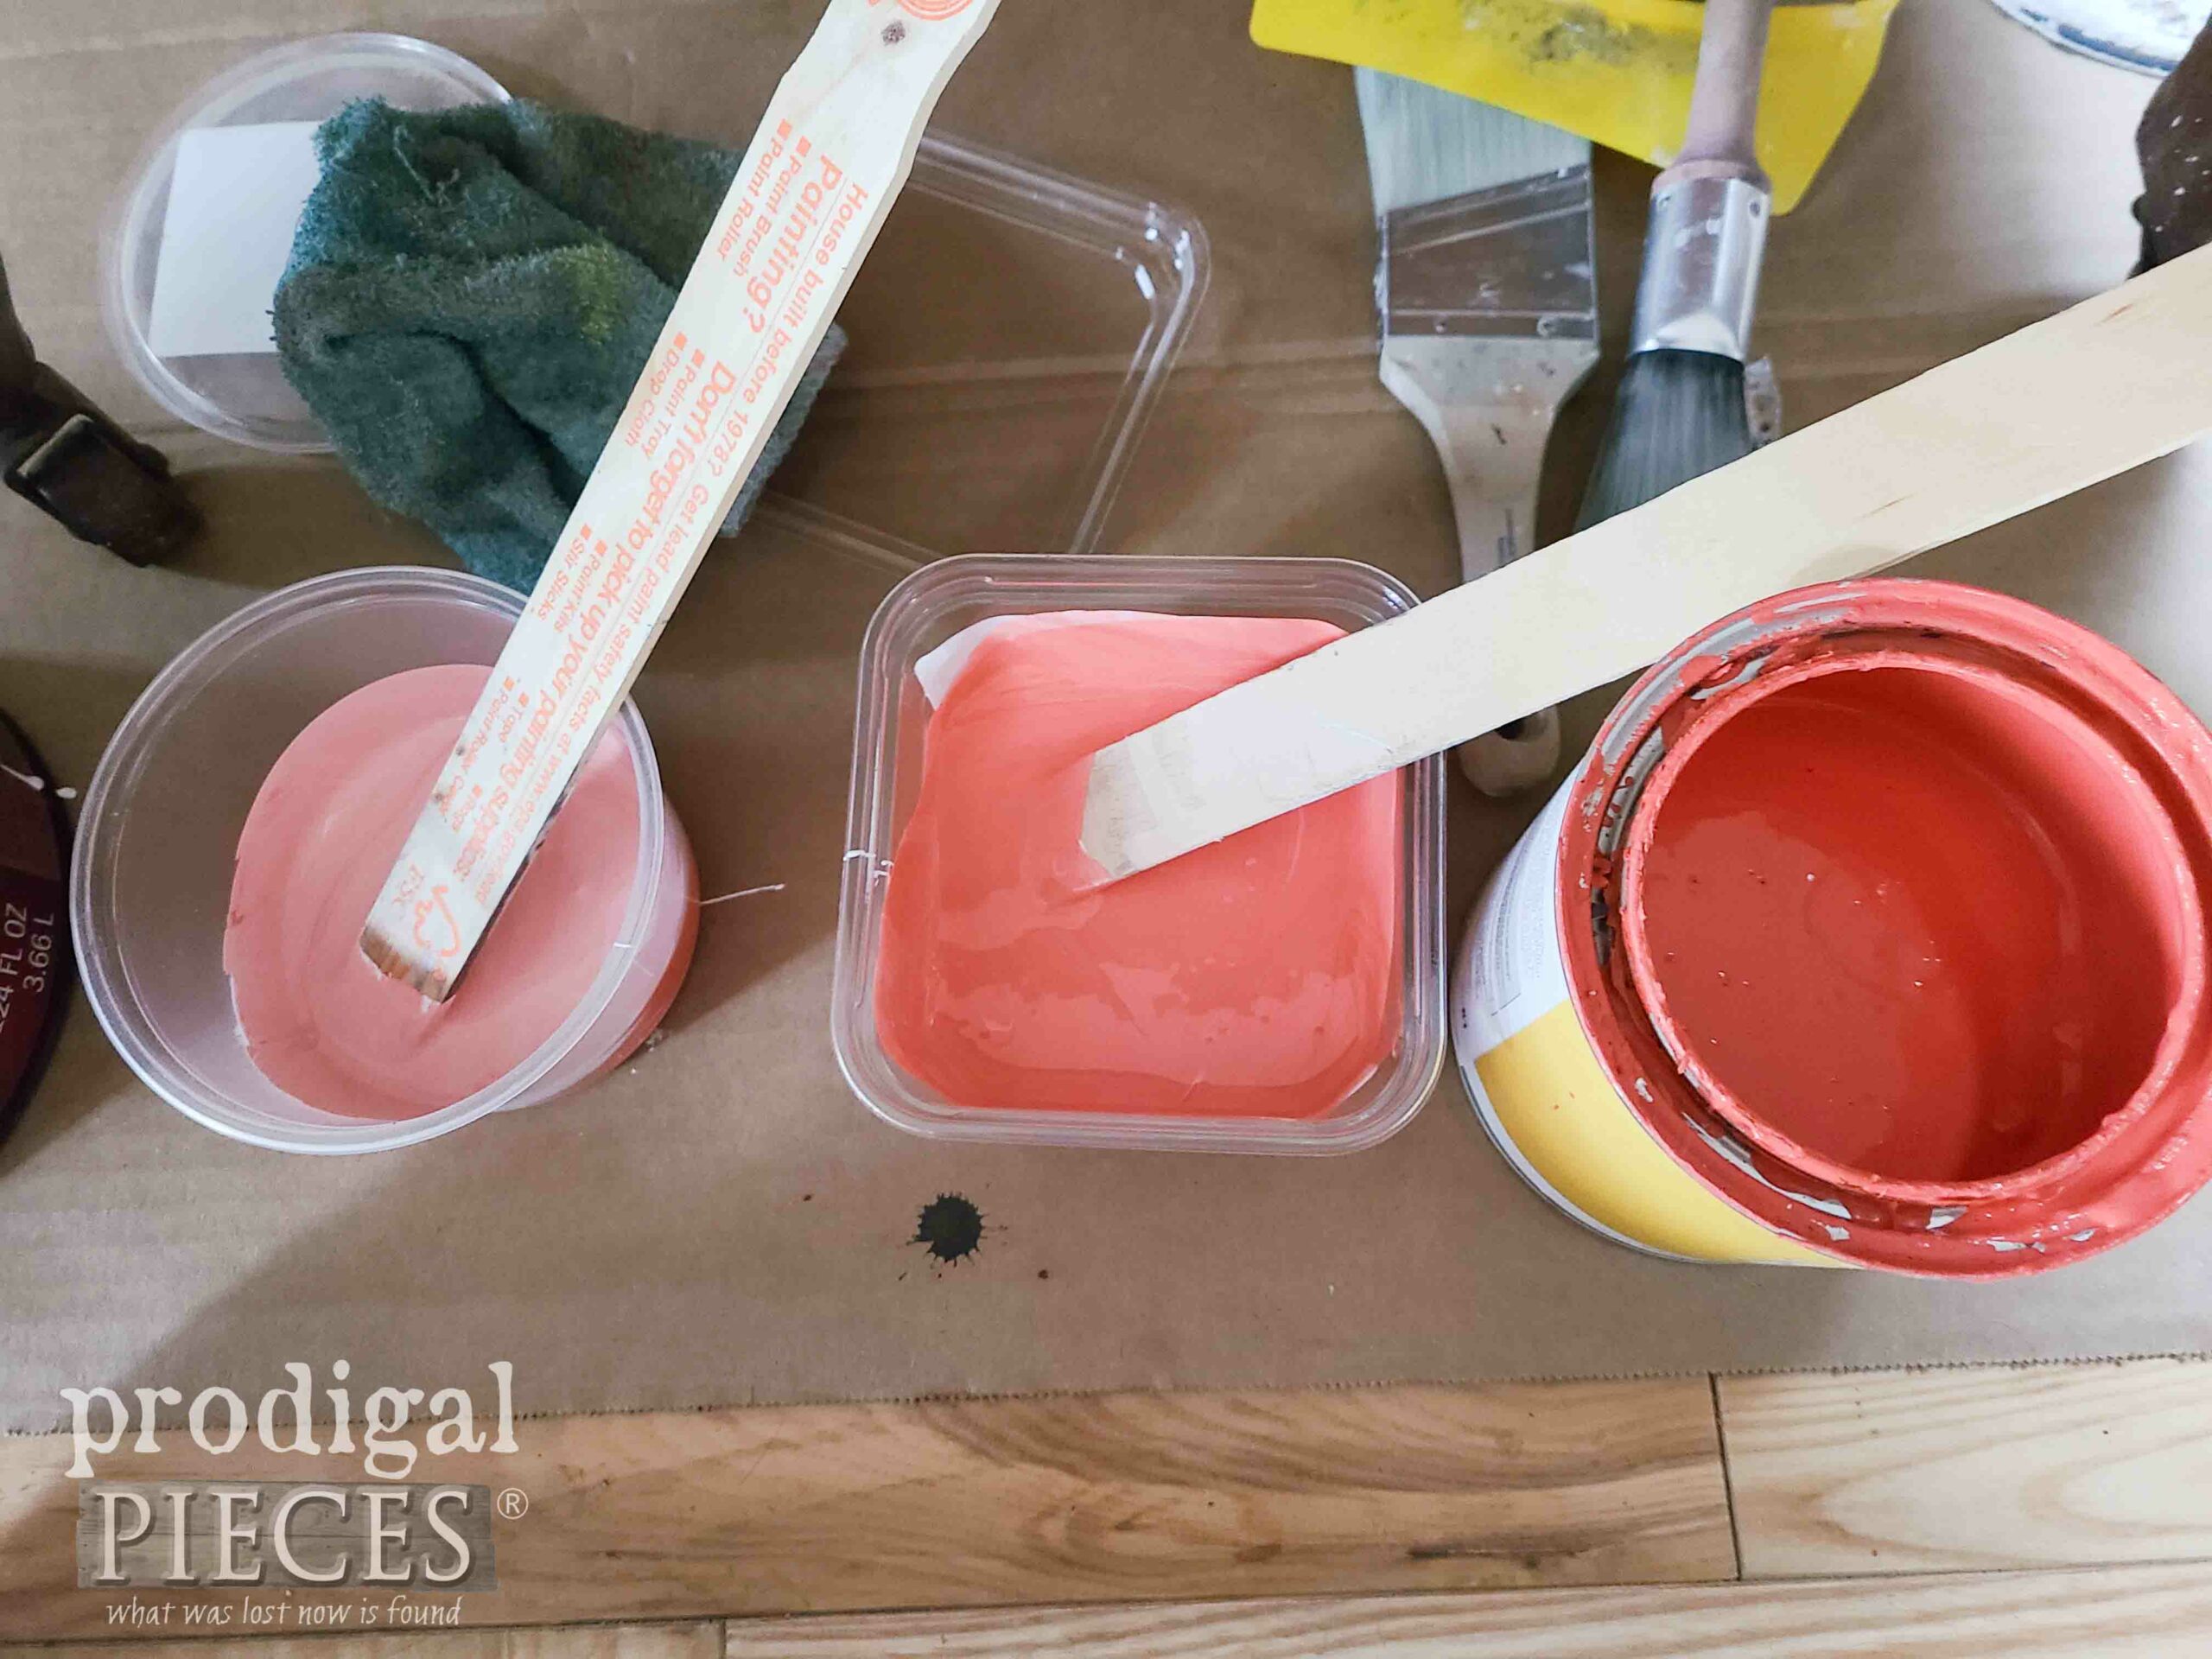 Mixed Coral Pinks for Ombre Dresser | prodigalpieces.com #prodigalpieces